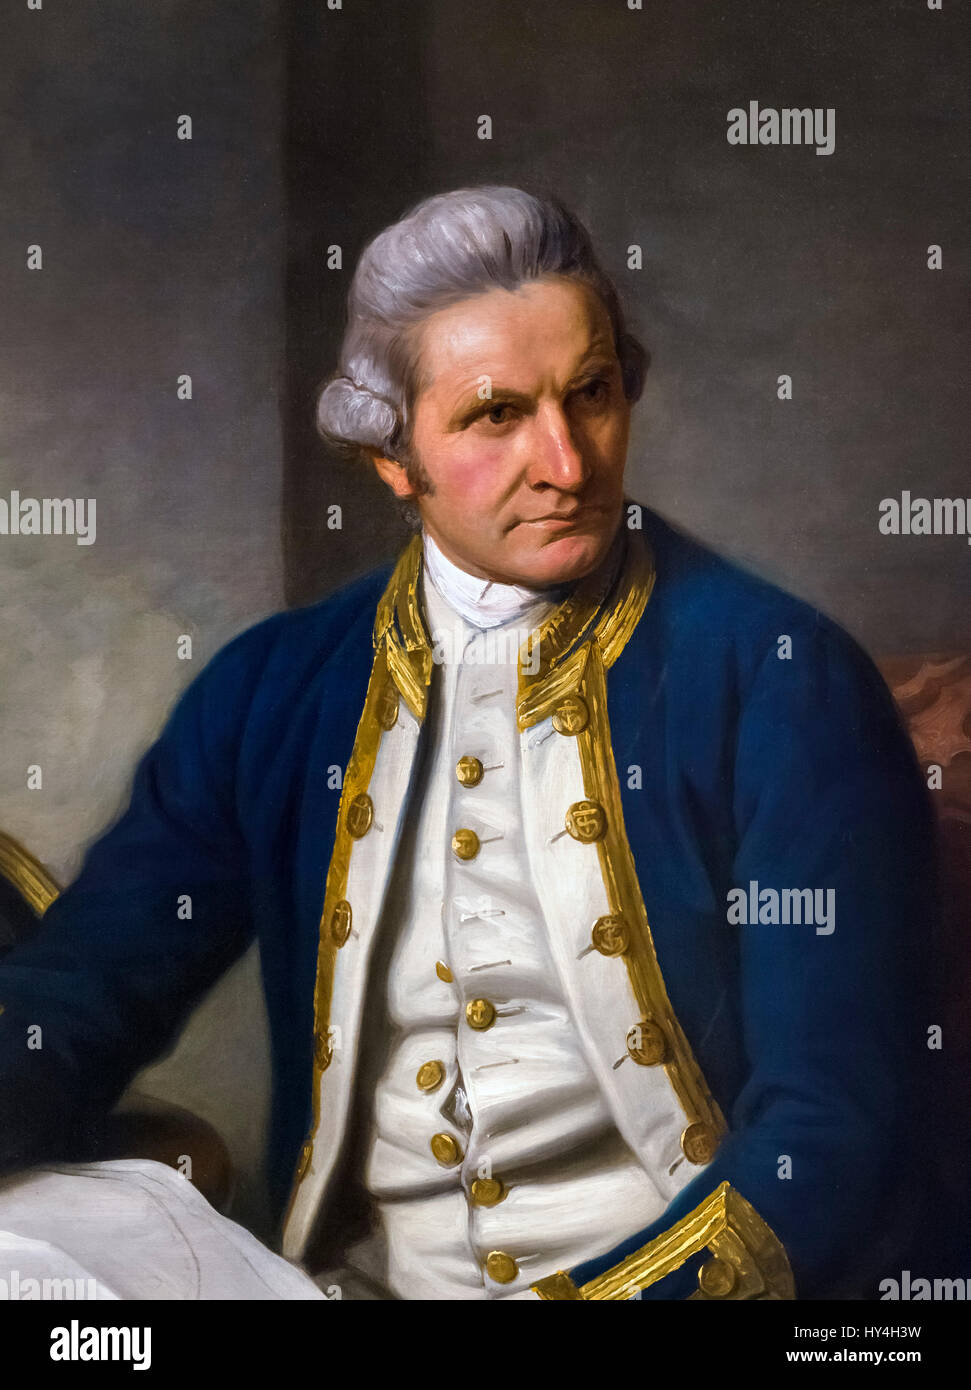 Captain Cook. Portrait of Captain James Cook (1728-1779) by Nathaniel Dance, oil on canvas, 1776. Detail of a larger painting, HY4H3Y. Stock Photo